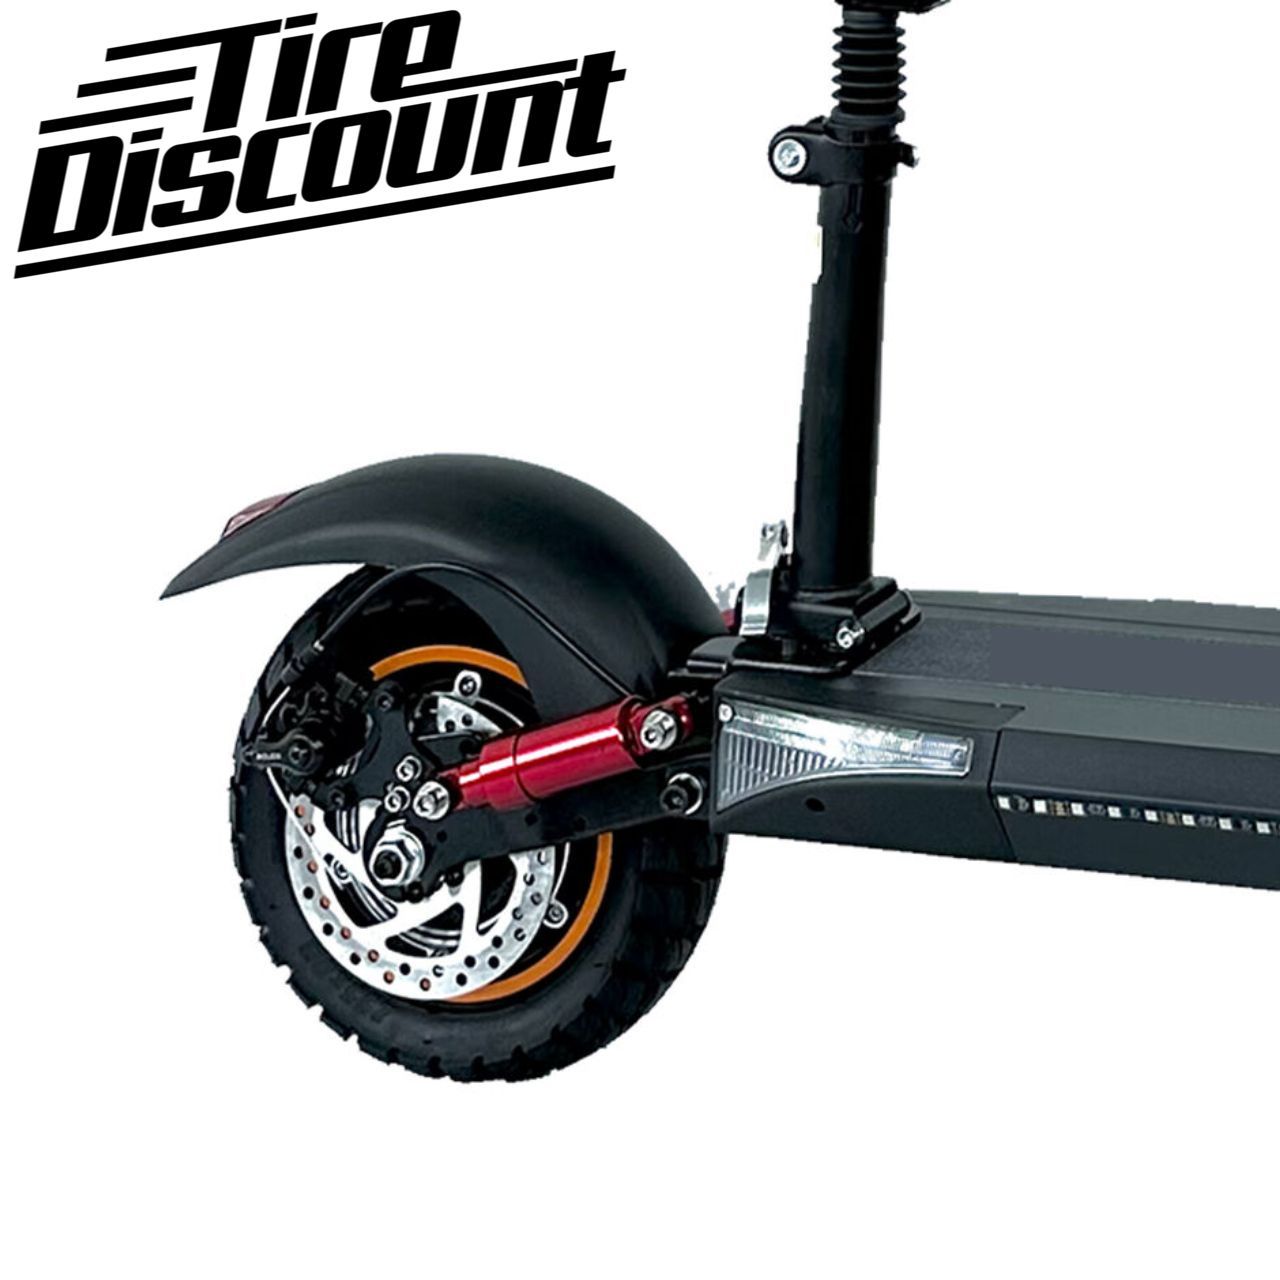 a close up of a tire discount electric scooter on a white background .